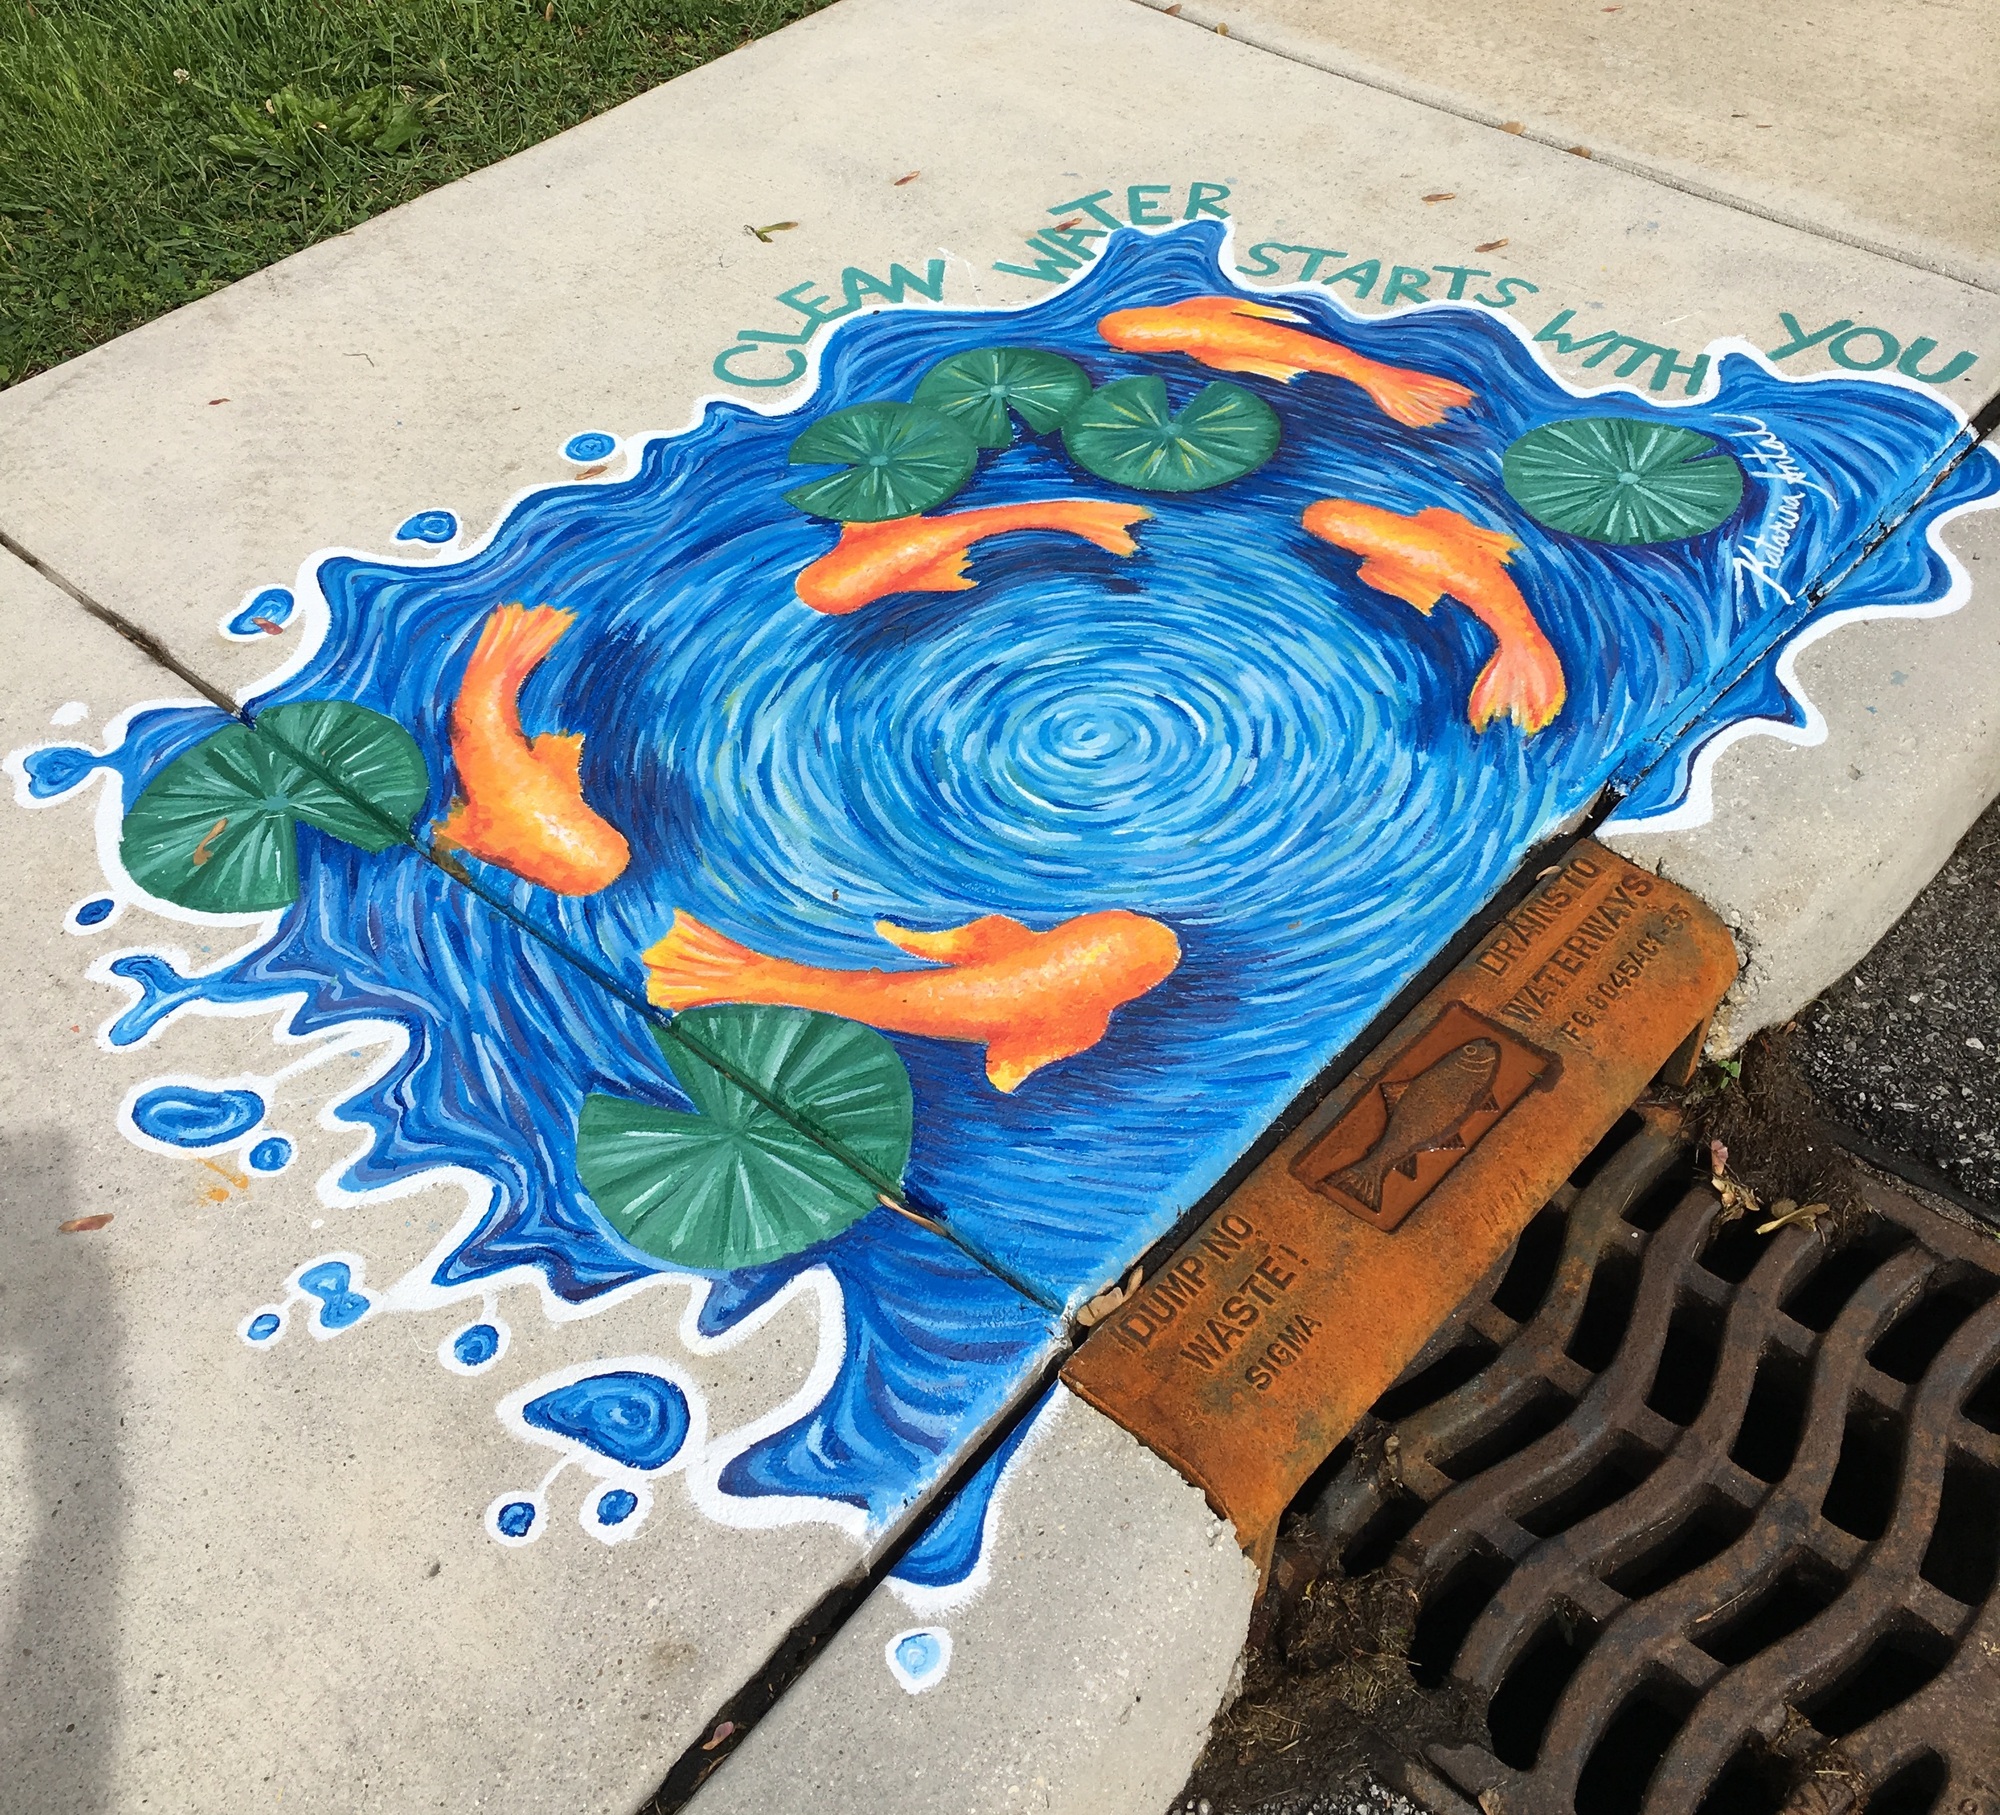 Clean Water Starts with You by Katarina Antal (2019). City of Goshen, Indiana.